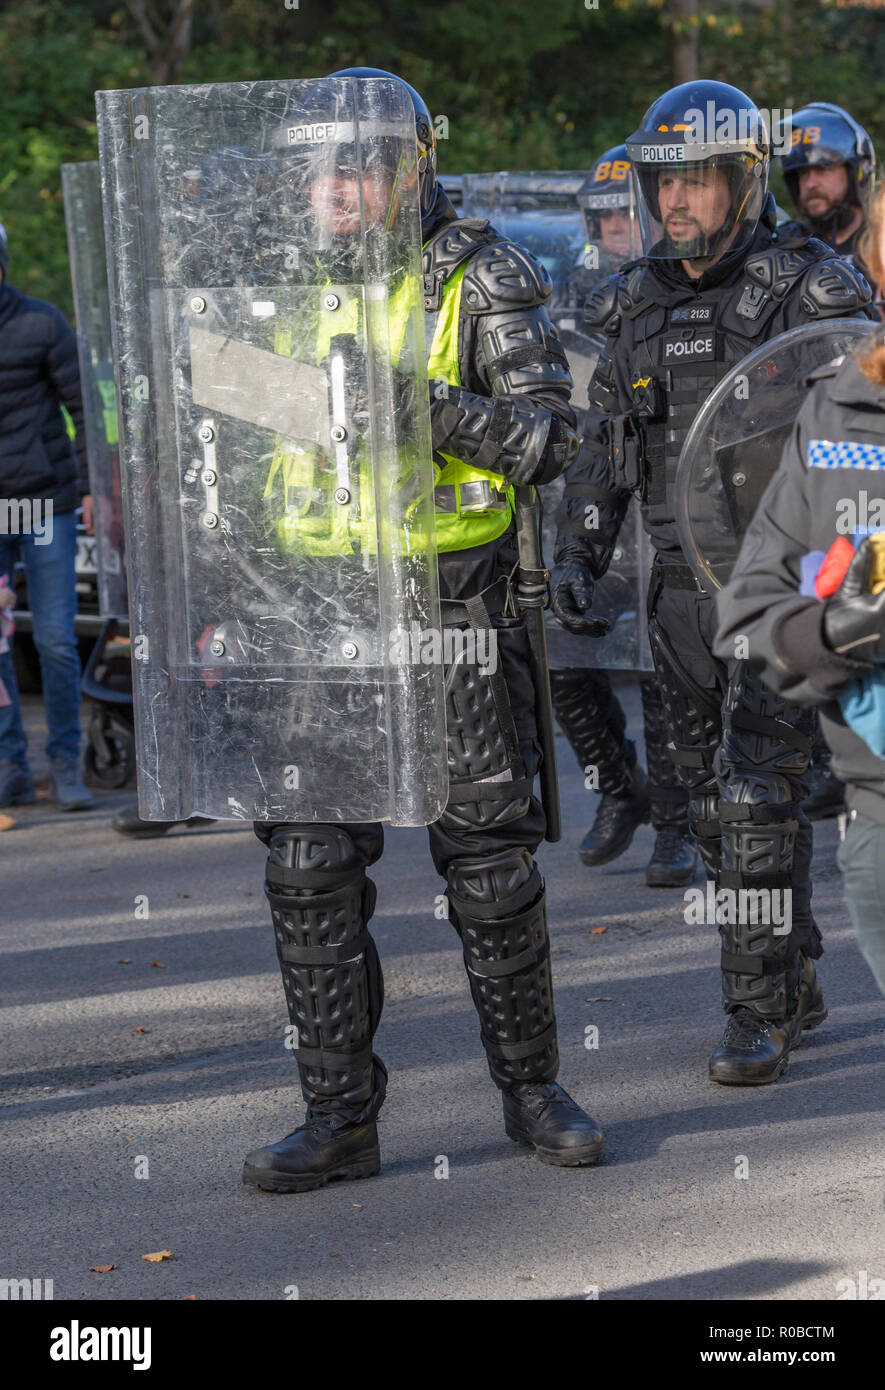 A Demonstration to the public of riot police tactics at a police open day Stock Photo